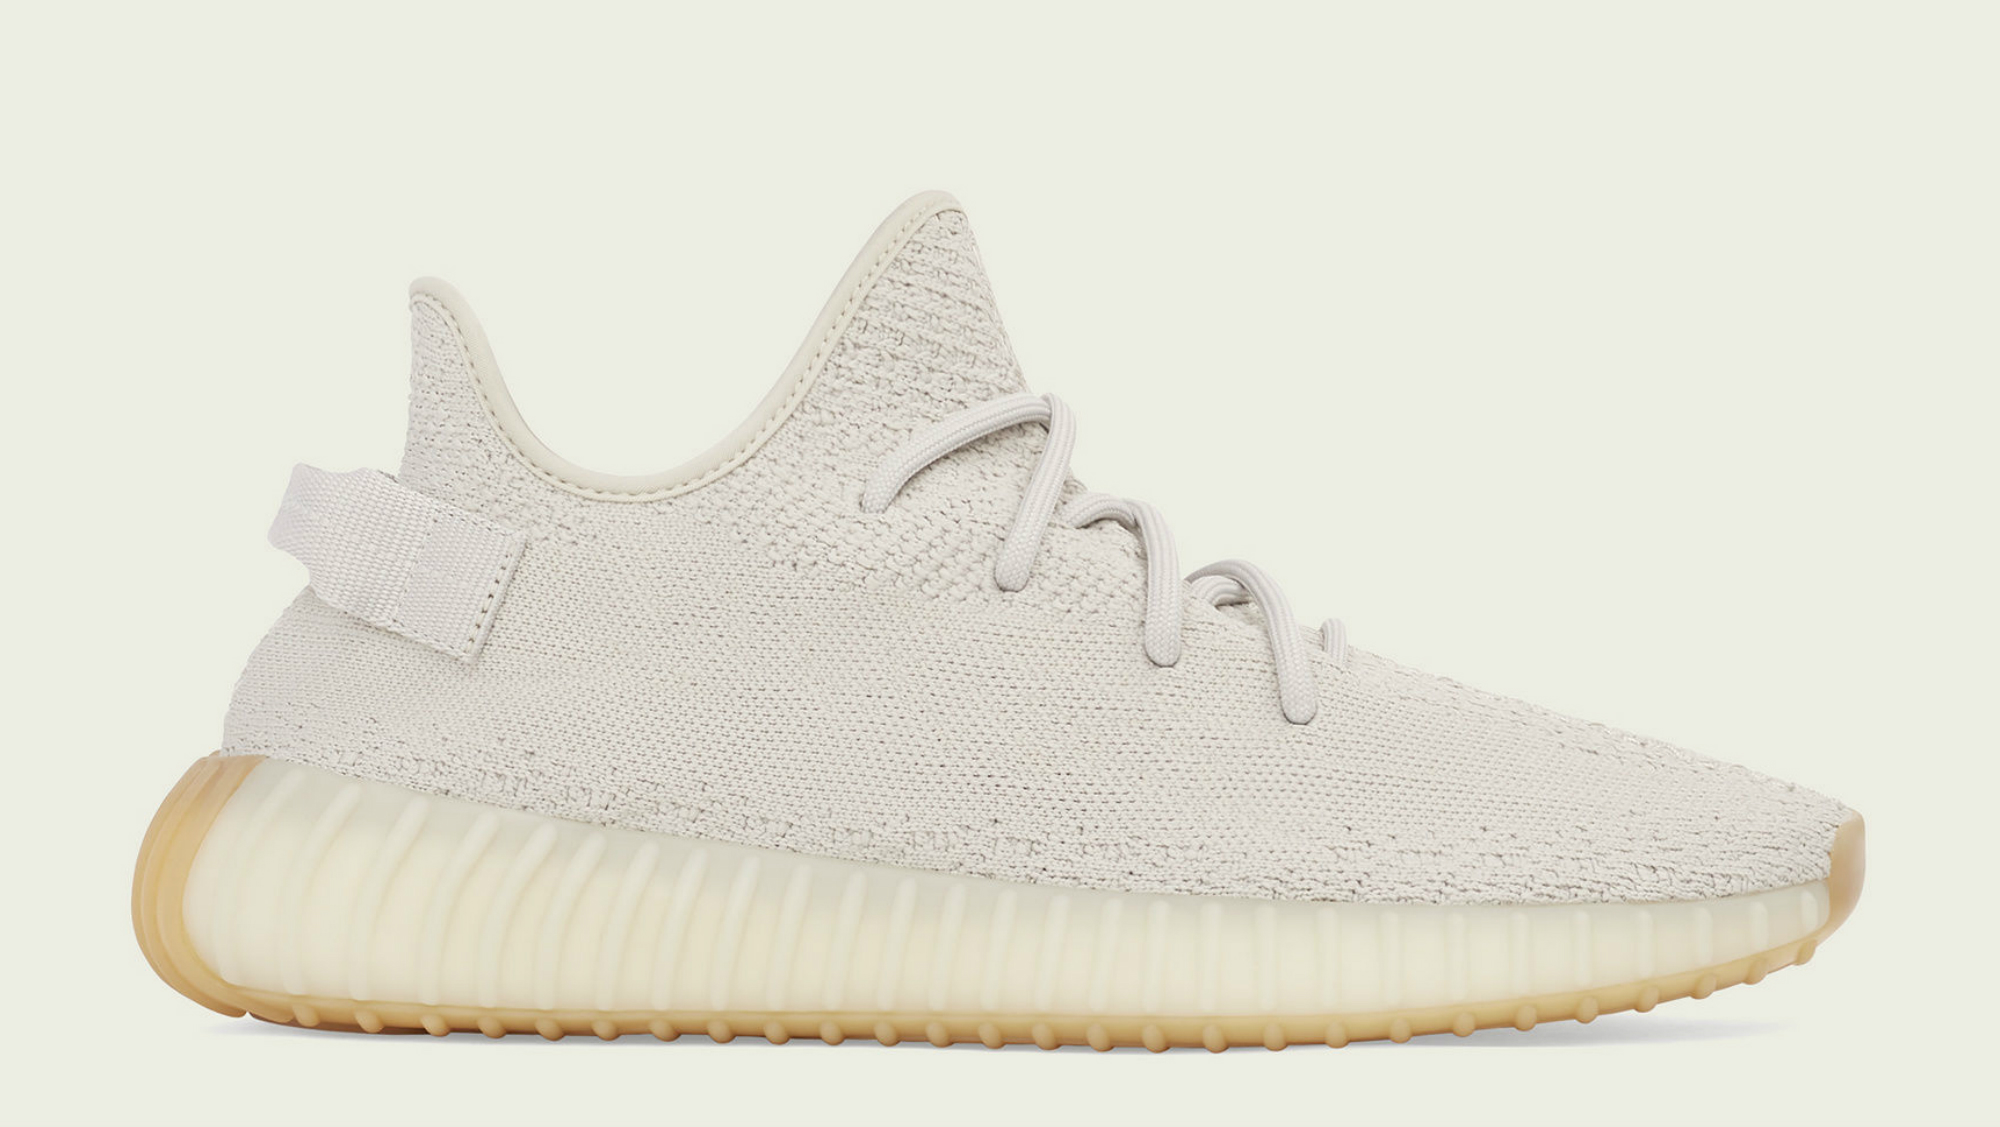 adidas yeezy boost 350 v2 sesame f99710 release date